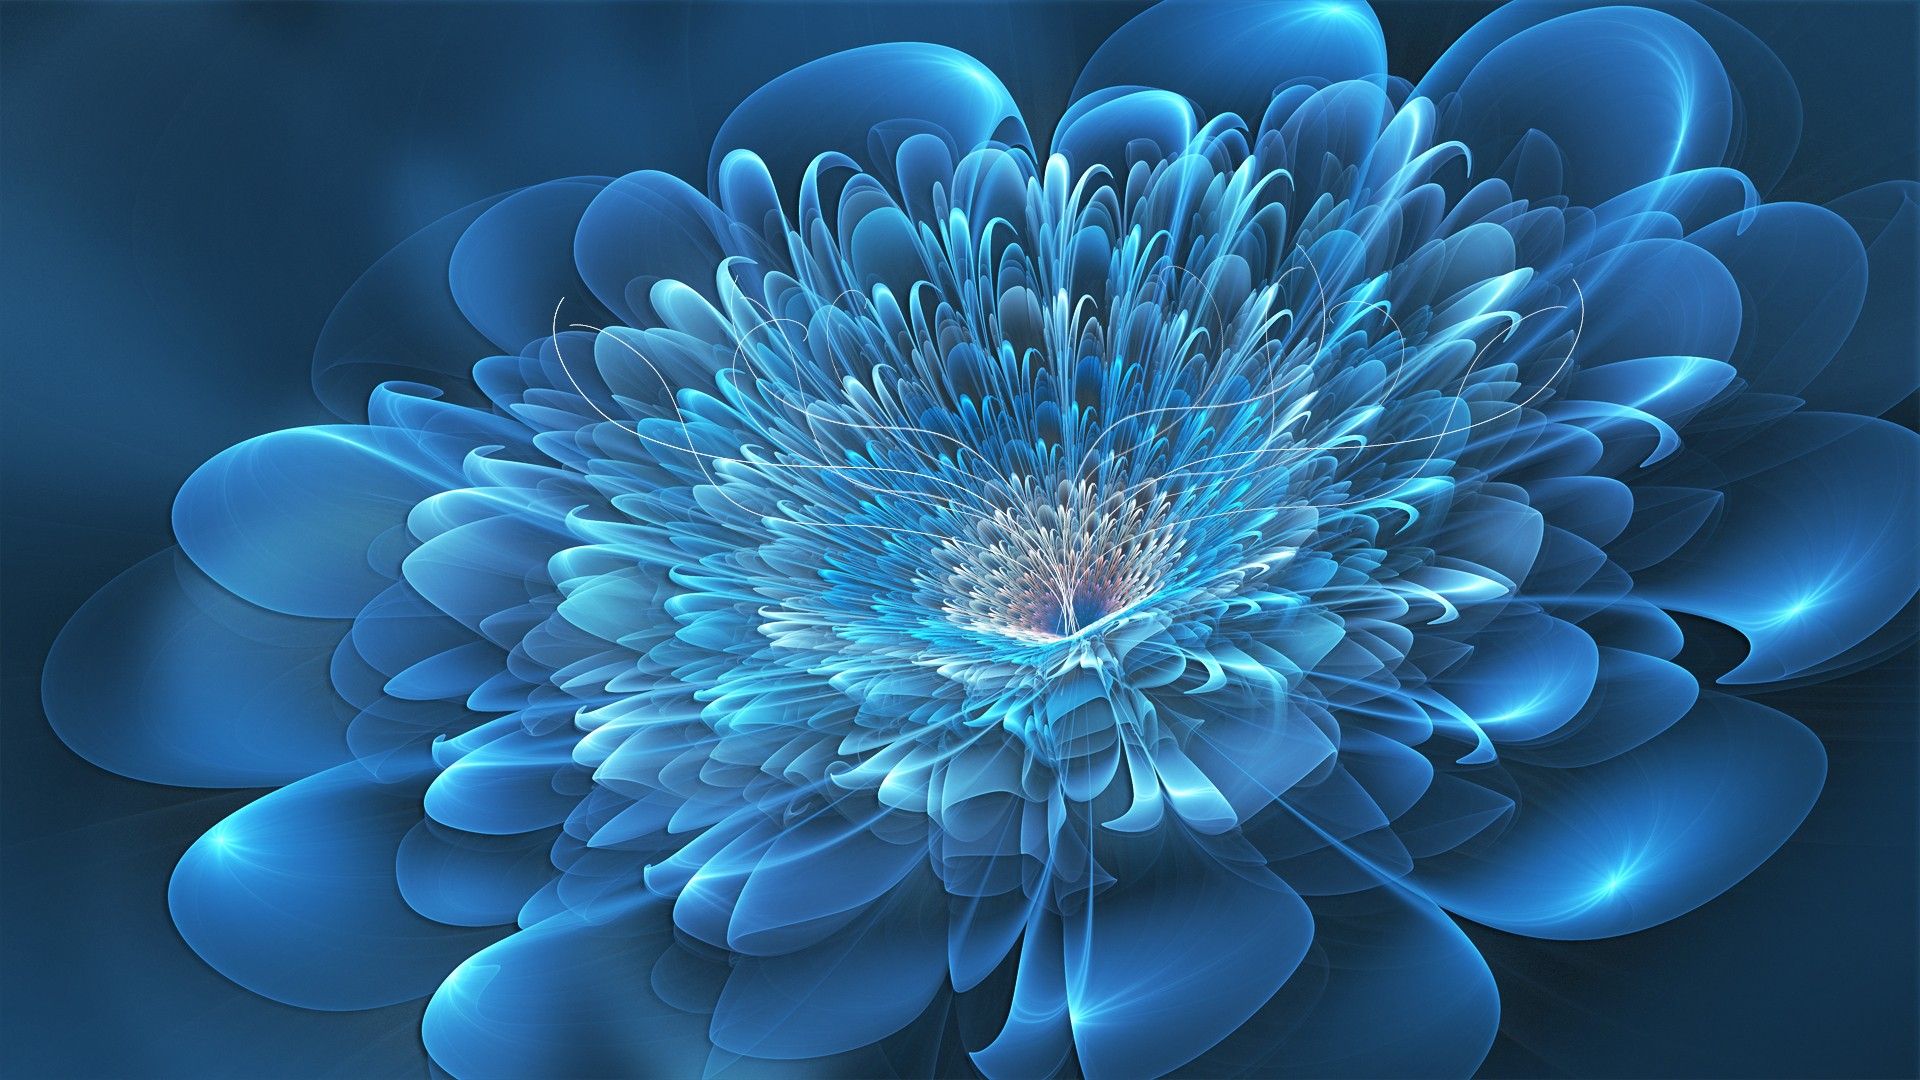 Wallpaper Abstraction 3d Flowers, 3d Flowers Images 